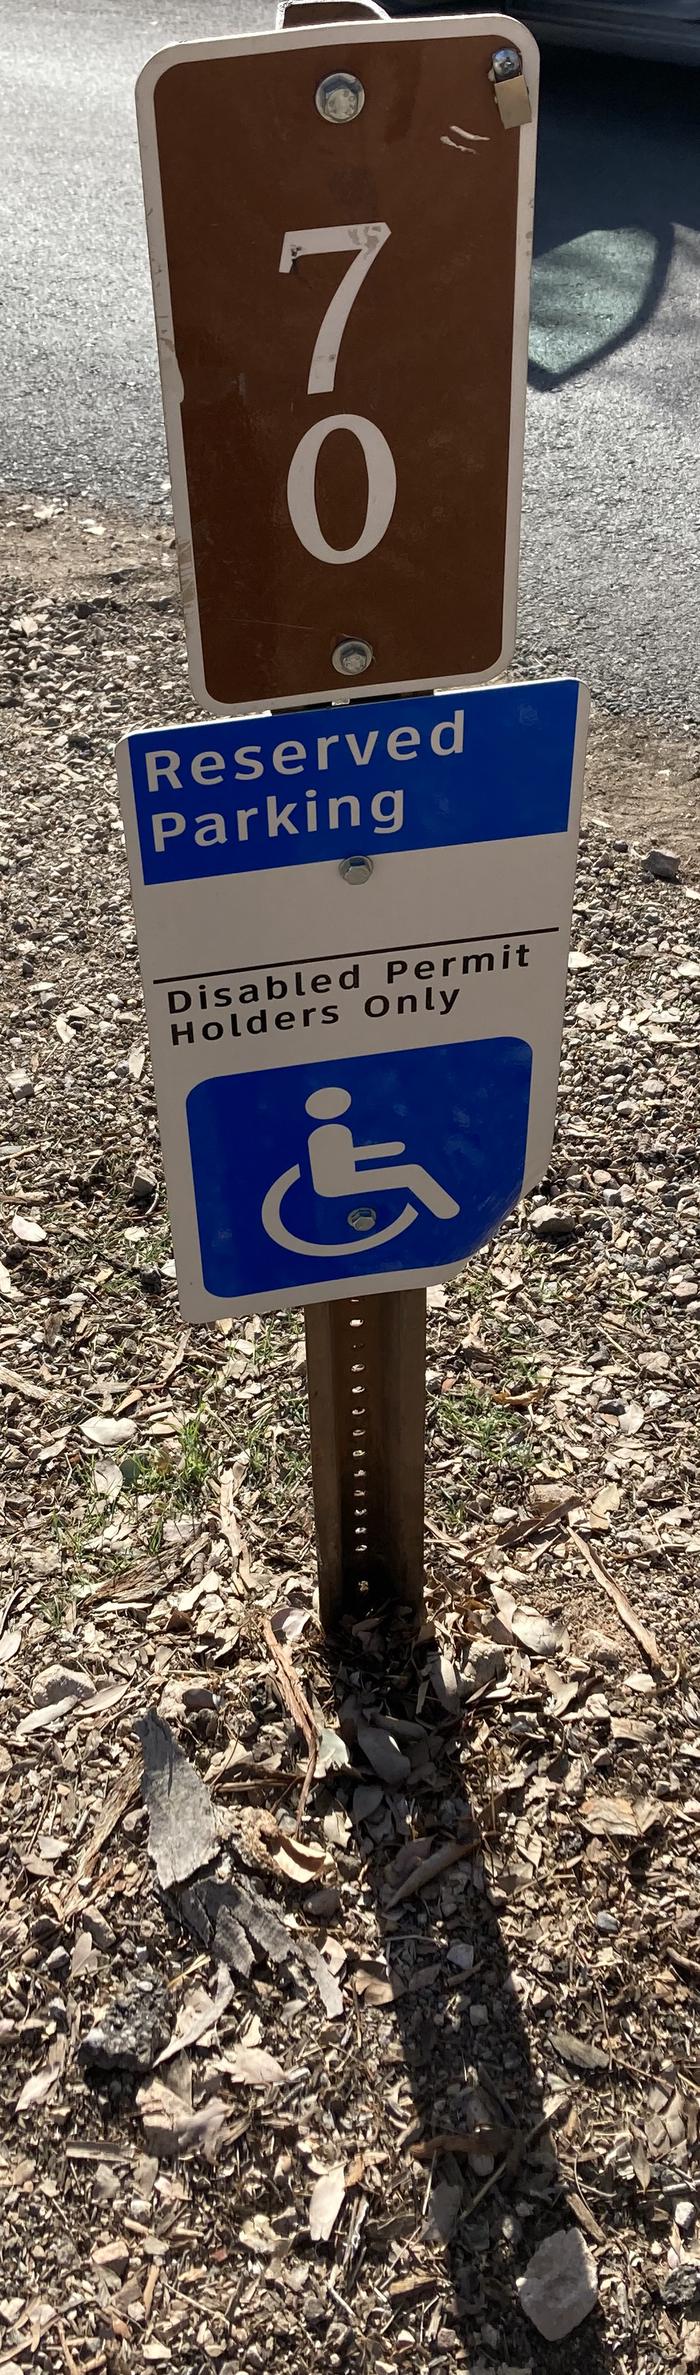 BB7002Boulder Beach Campground Site 70 - Handicap site for Accessible use only